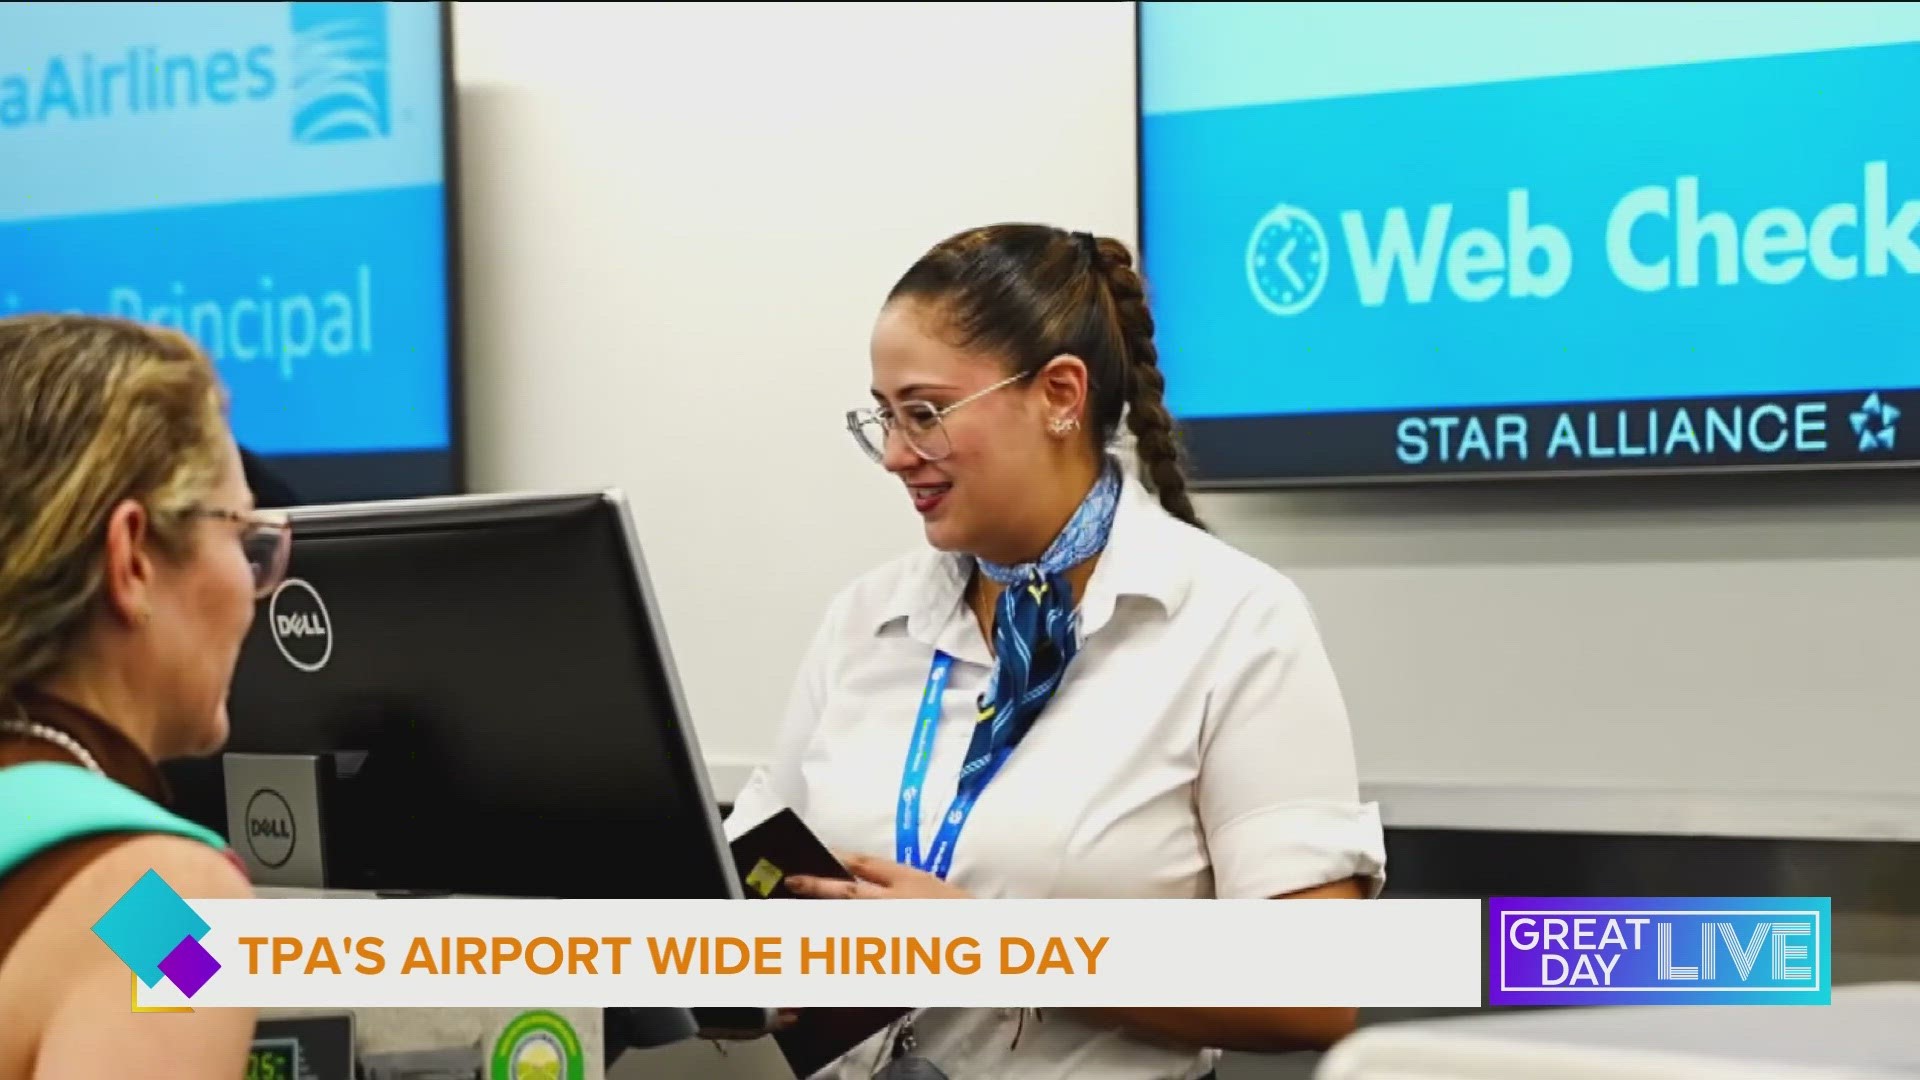 TPA and more than 20 of its airport partners are looking to fill hundreds of jobs. The airport is hosting a hiring day Sept. 14th from 9 a.m. to noon.